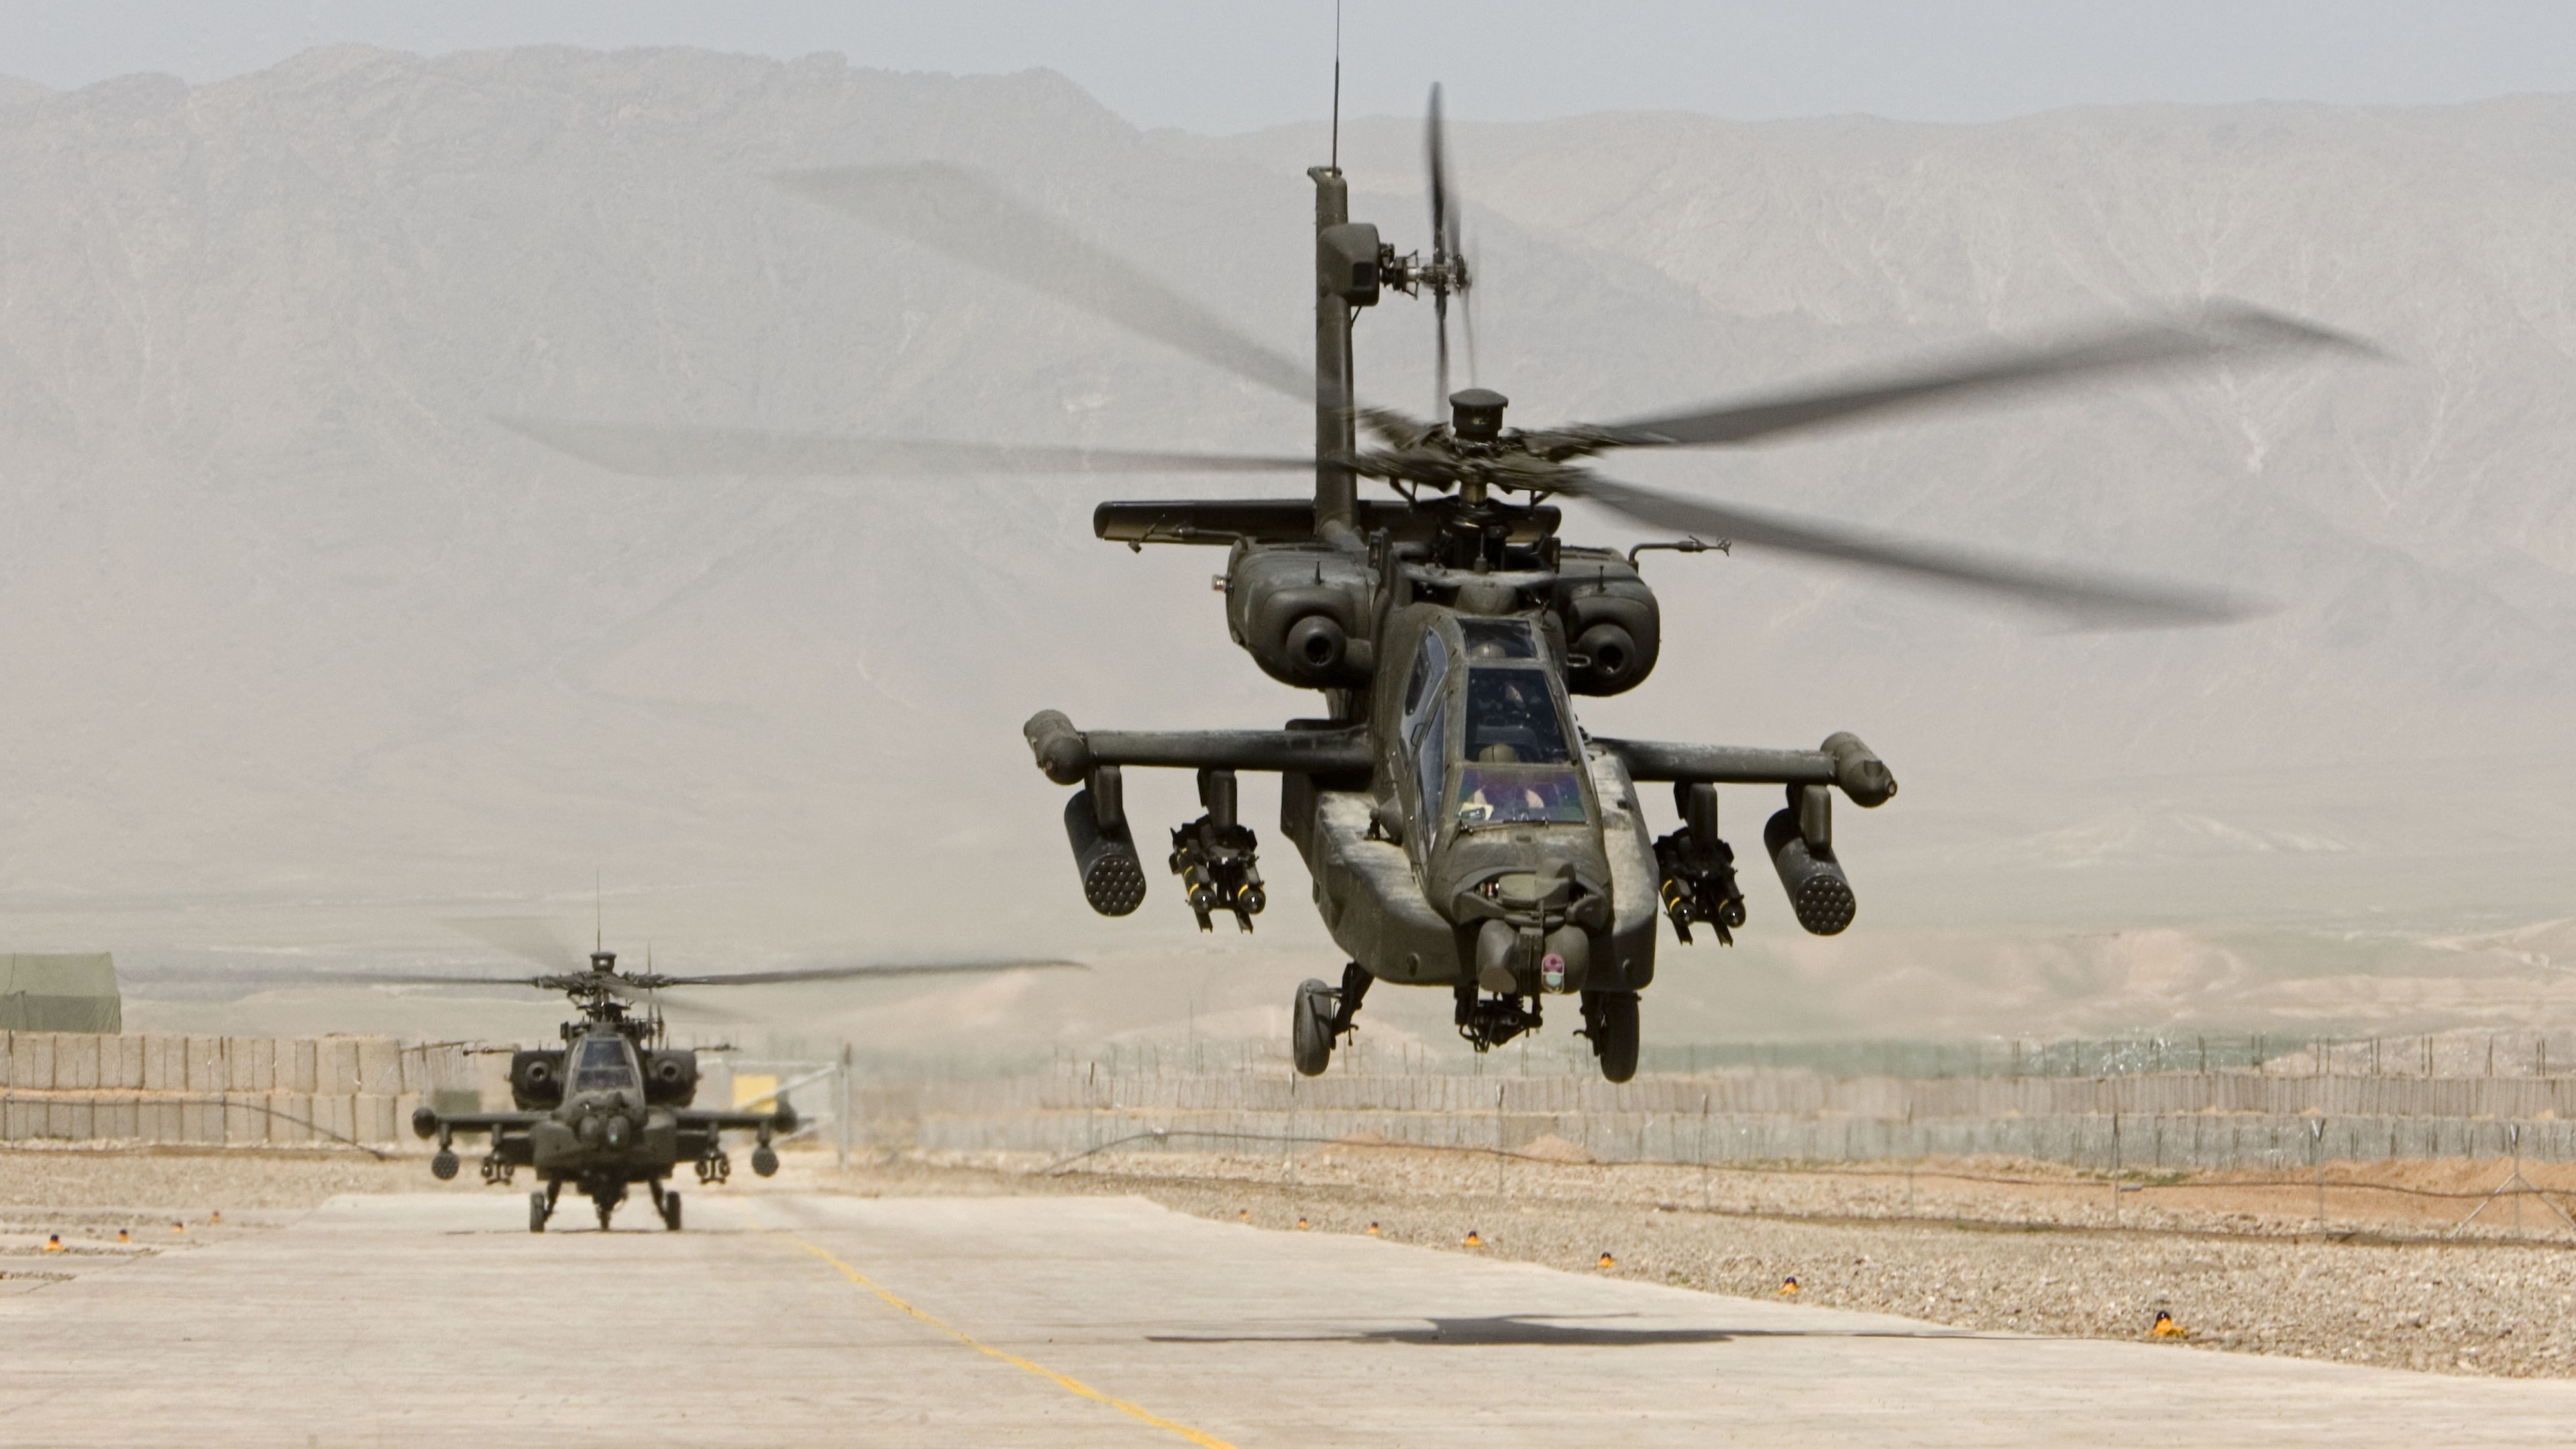 Wallpaper Ah 64 Apache Attack Helicopter Us Army U S Air Force